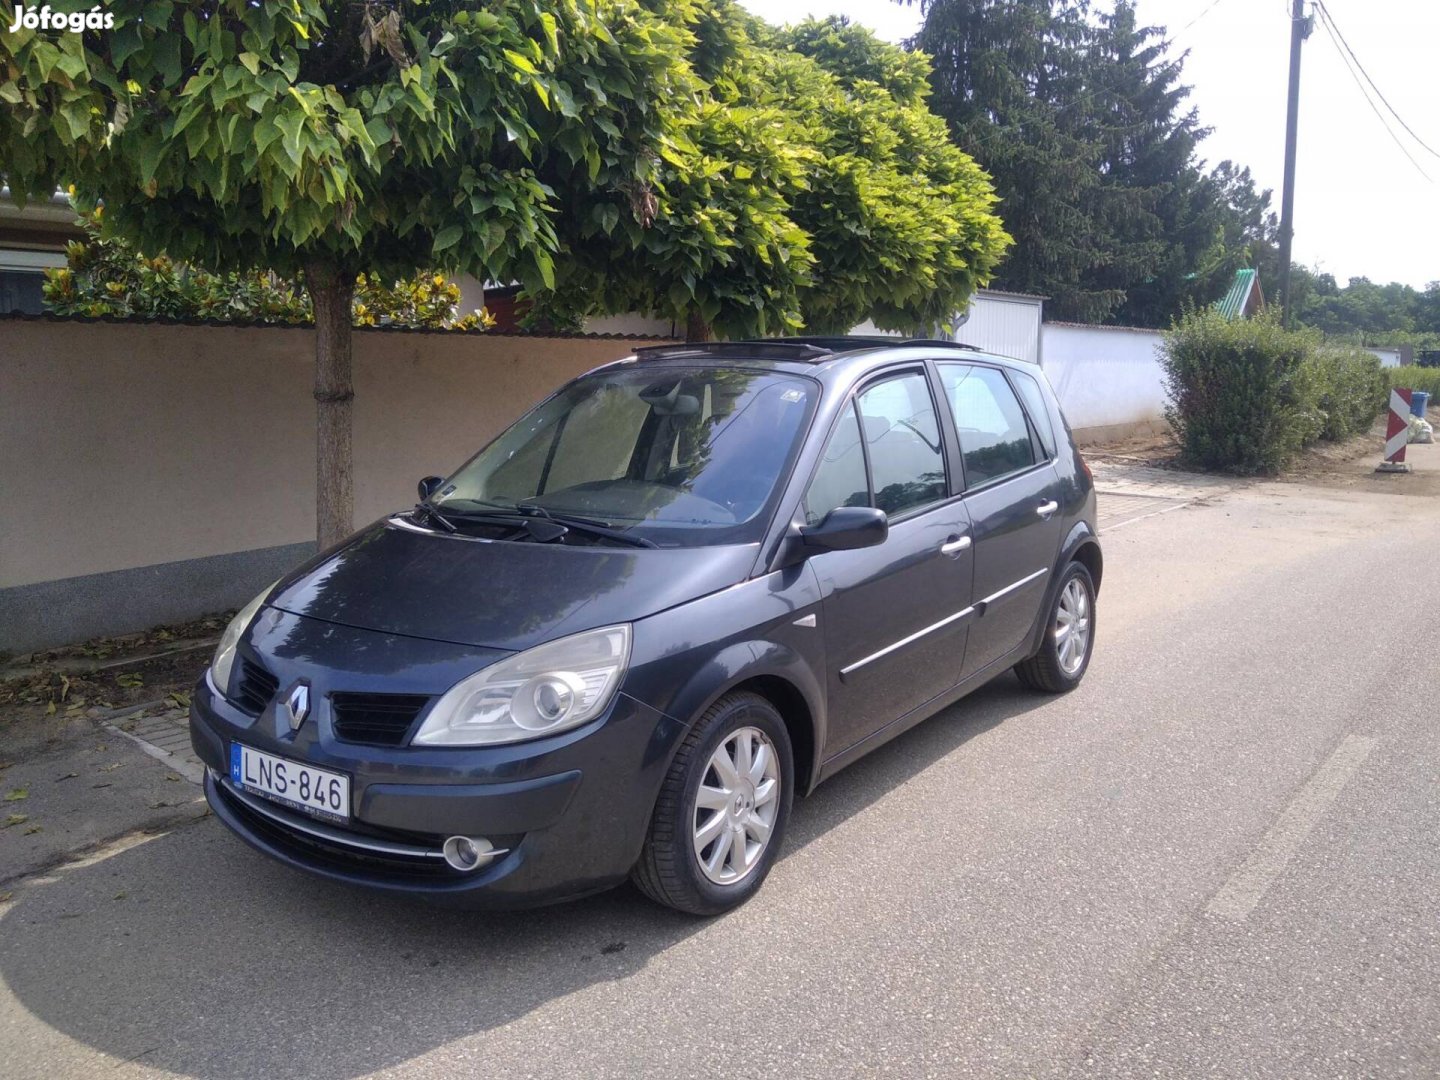 Renault Scenic Scénic 1.5 dCi Privilege Magyar....